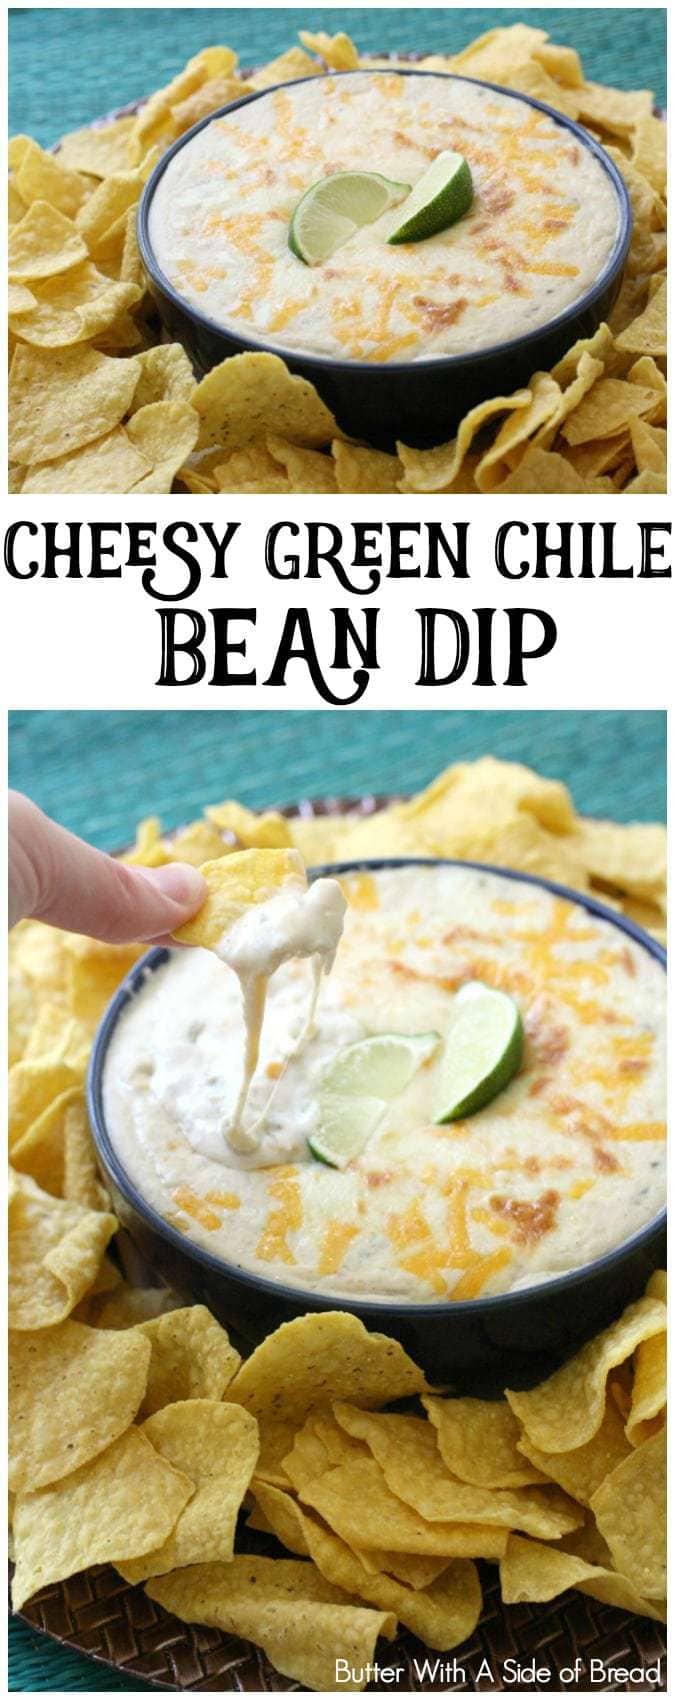 Cheesy Green Chile Bean Dip - Butter With A Side of Bread